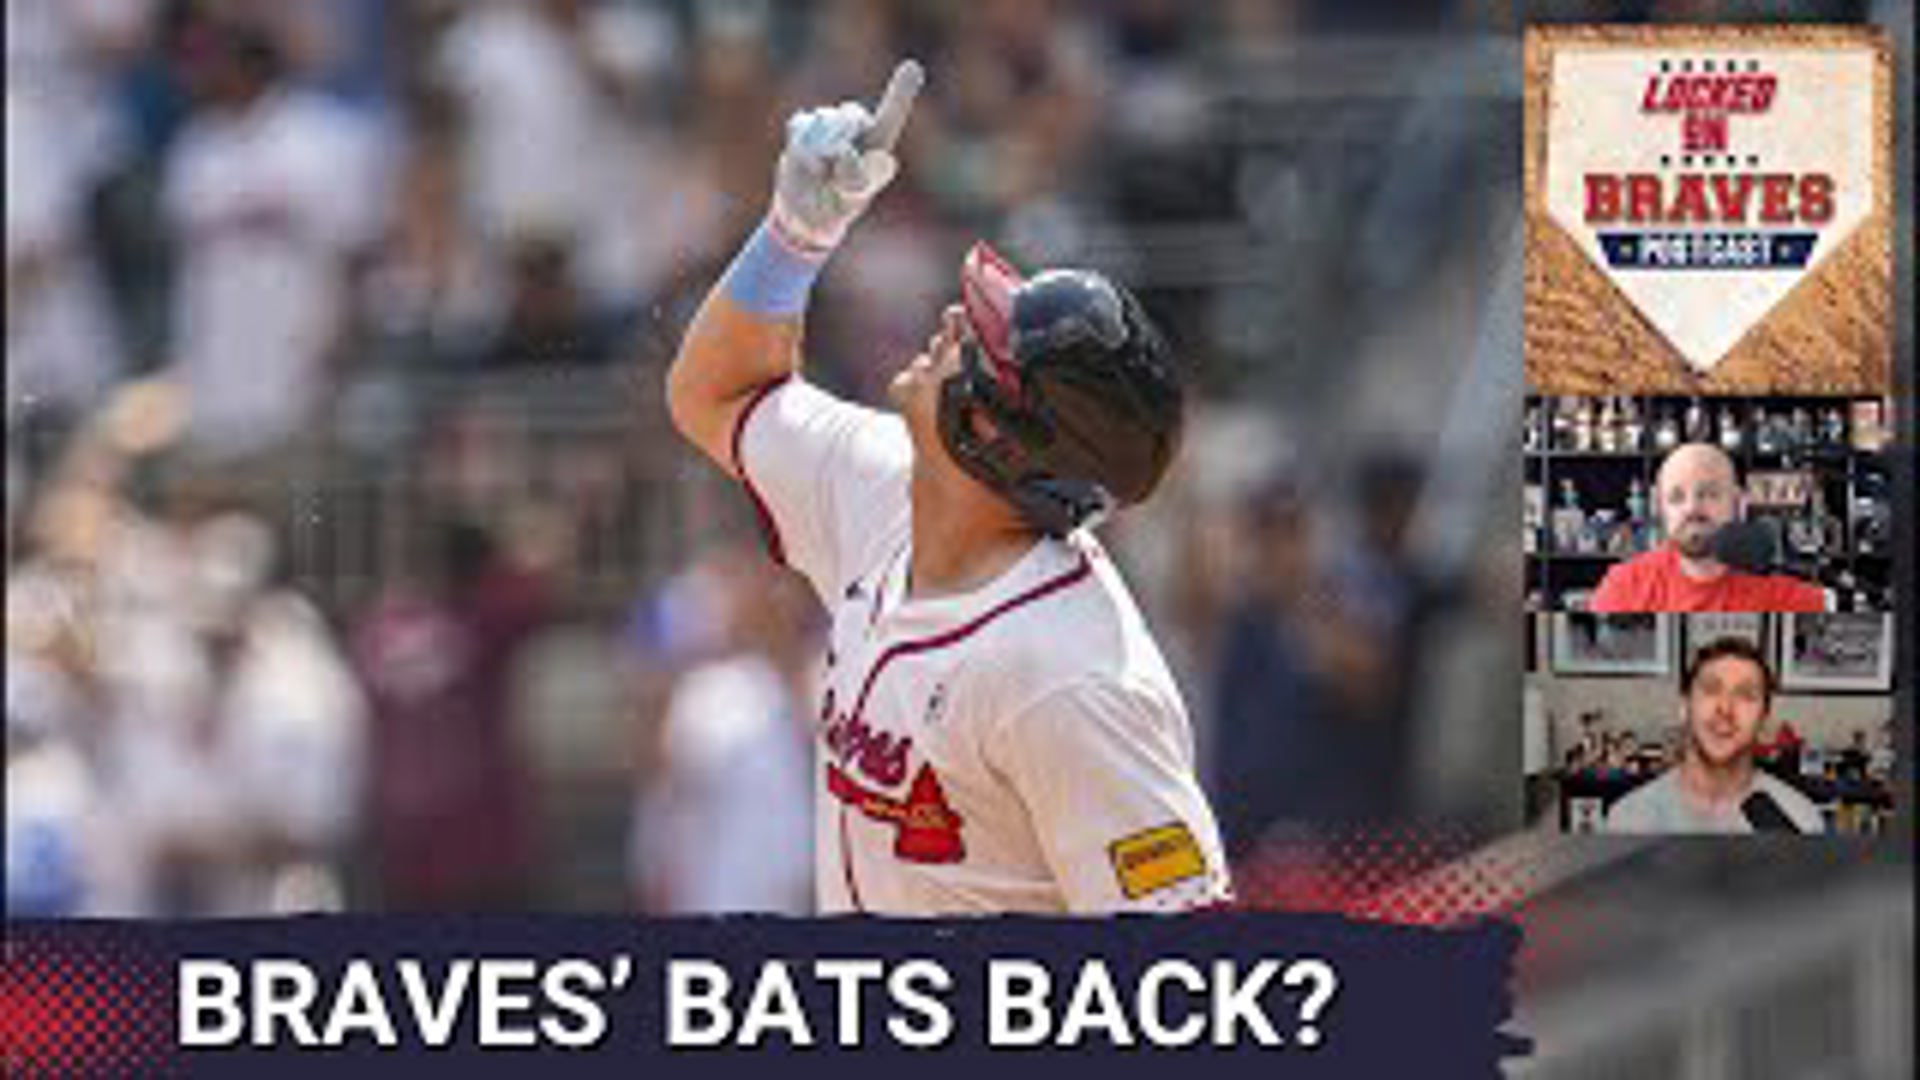 It was a return to form for an offense that had been searching and searching for answers and momentum. The Atlanta Braves overpowered the Tampa Bay Rays.